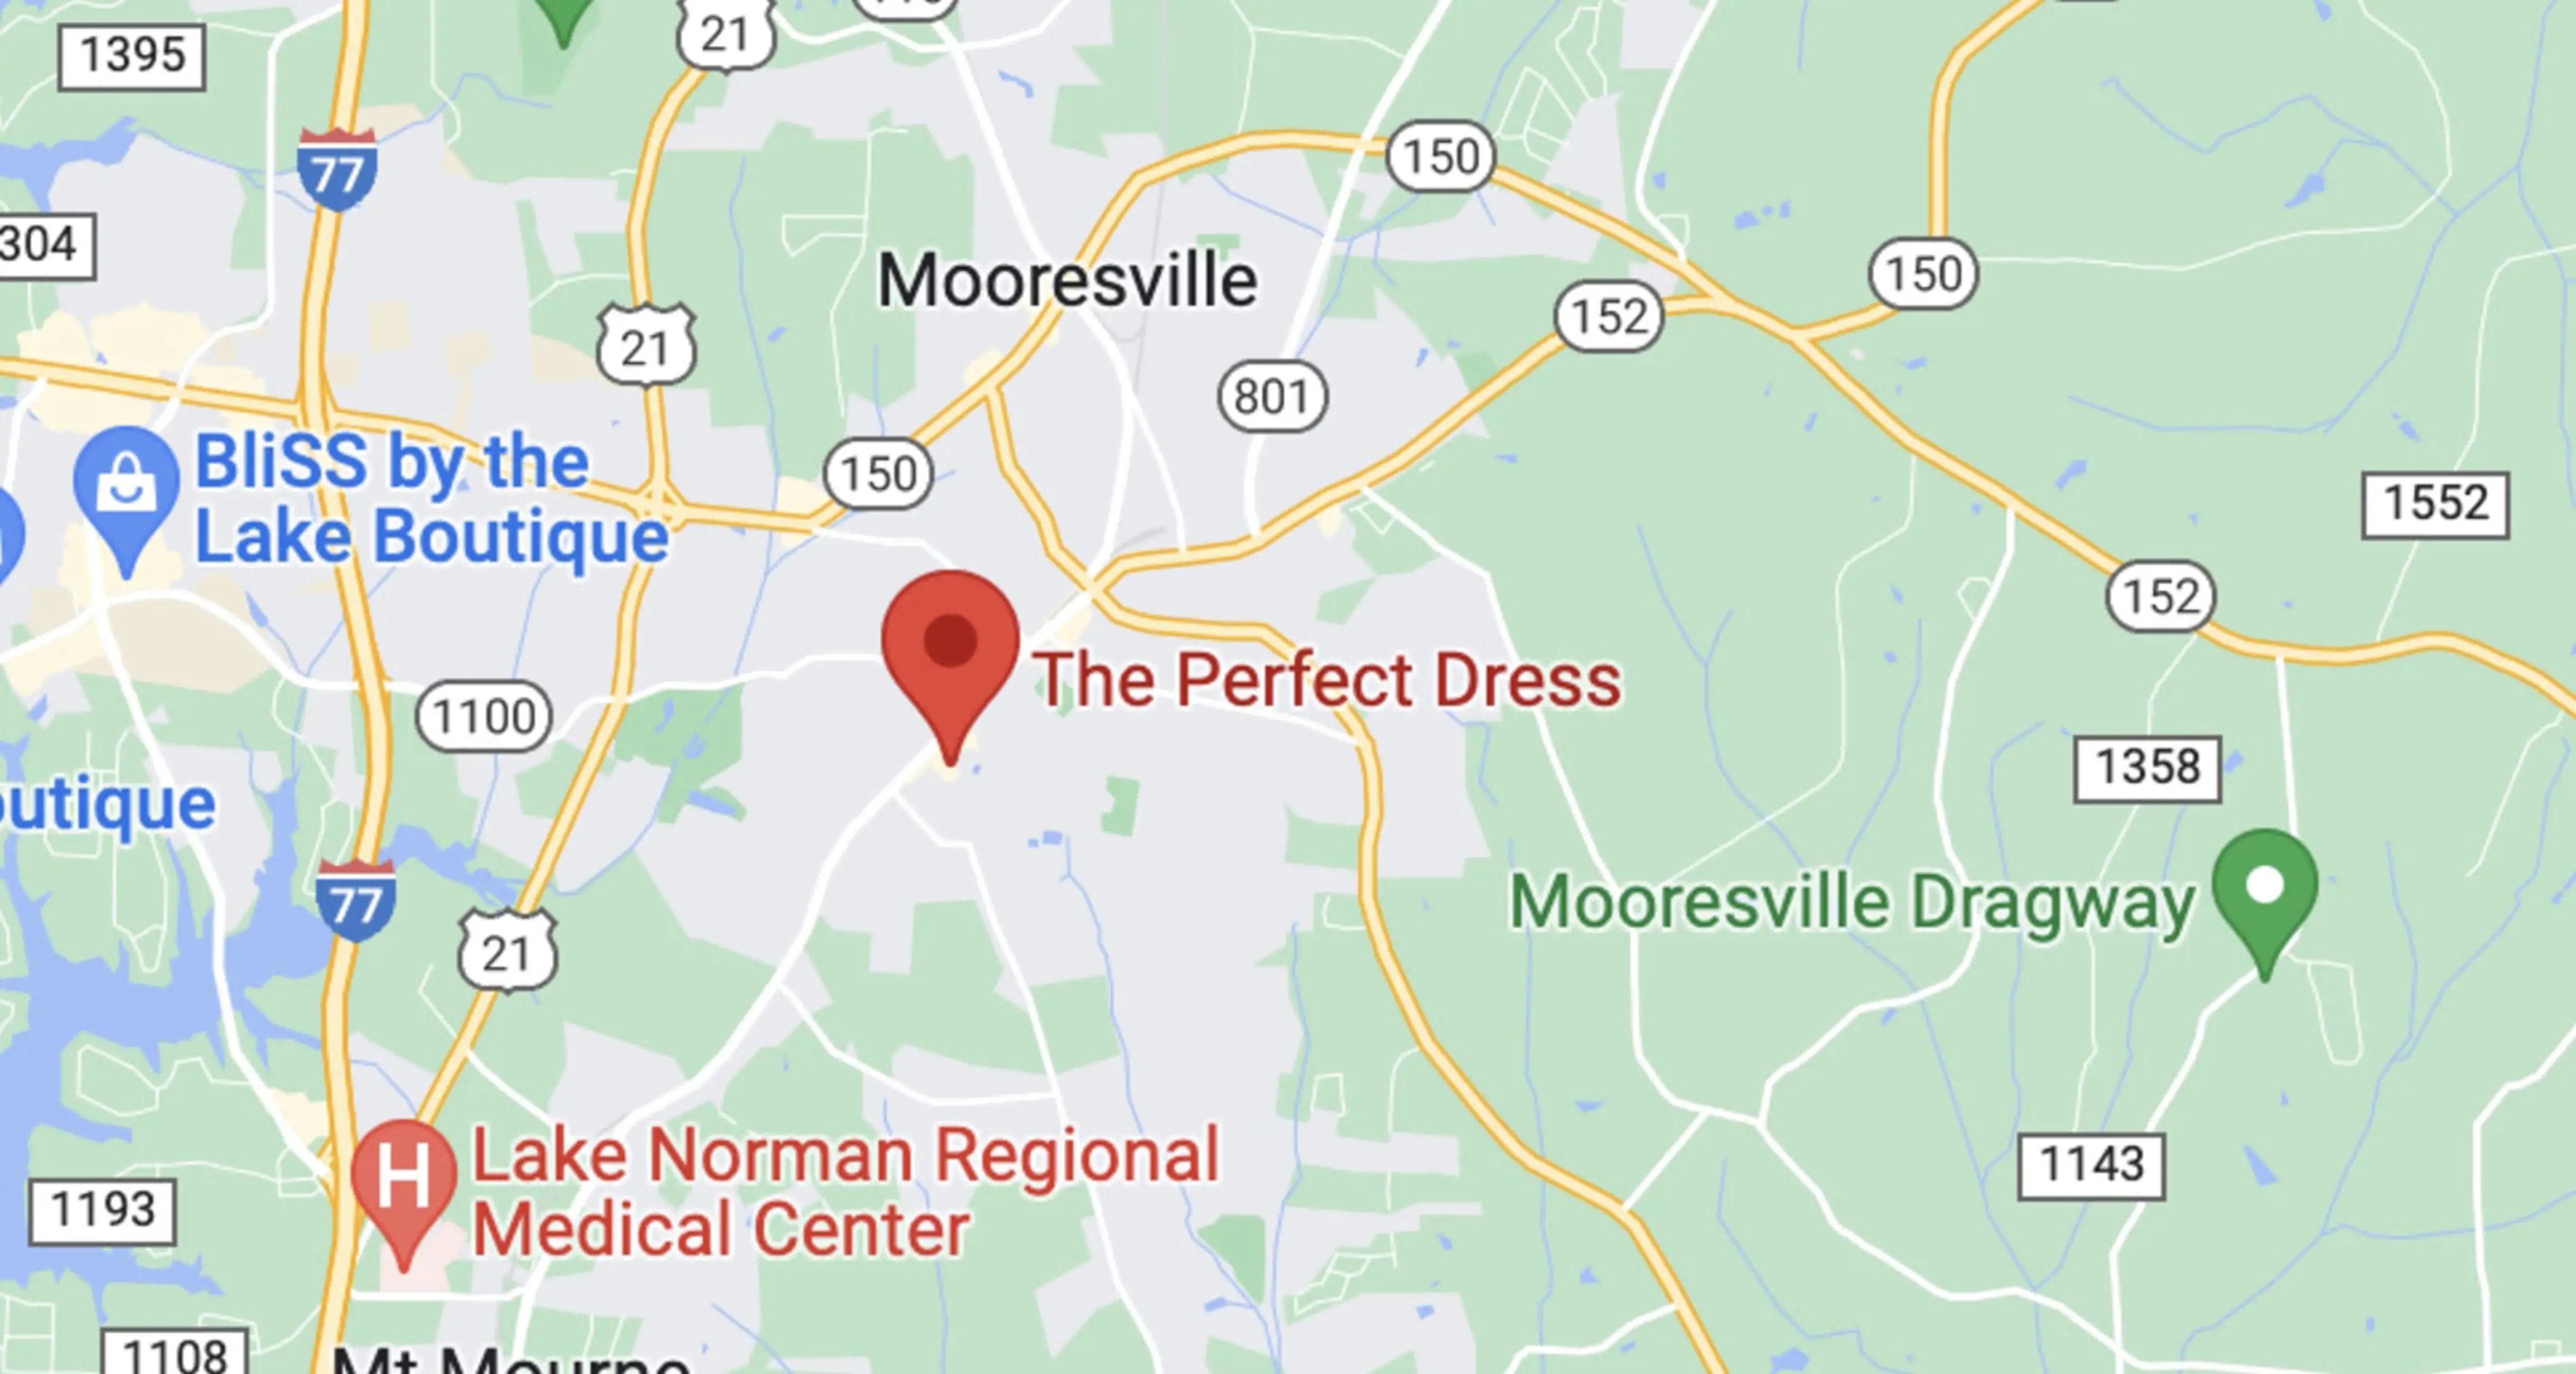 The Perfect Dress NC location. Mobile image